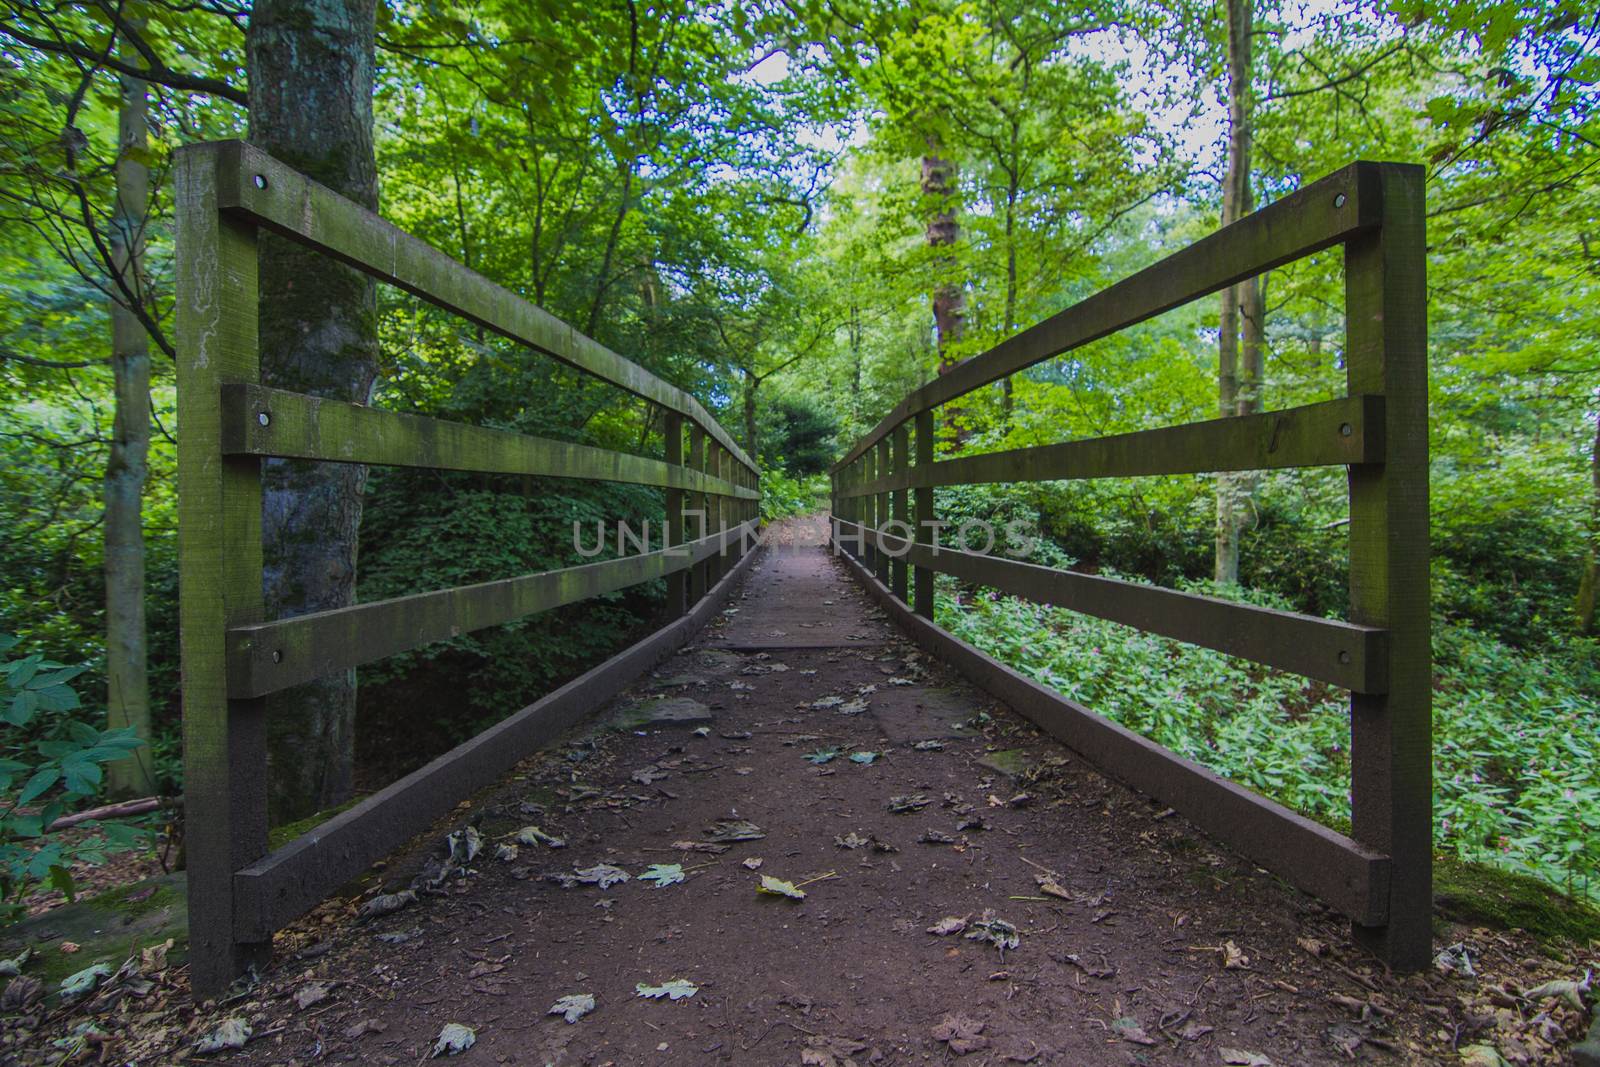 A Wooden Bridge in the Woods in England